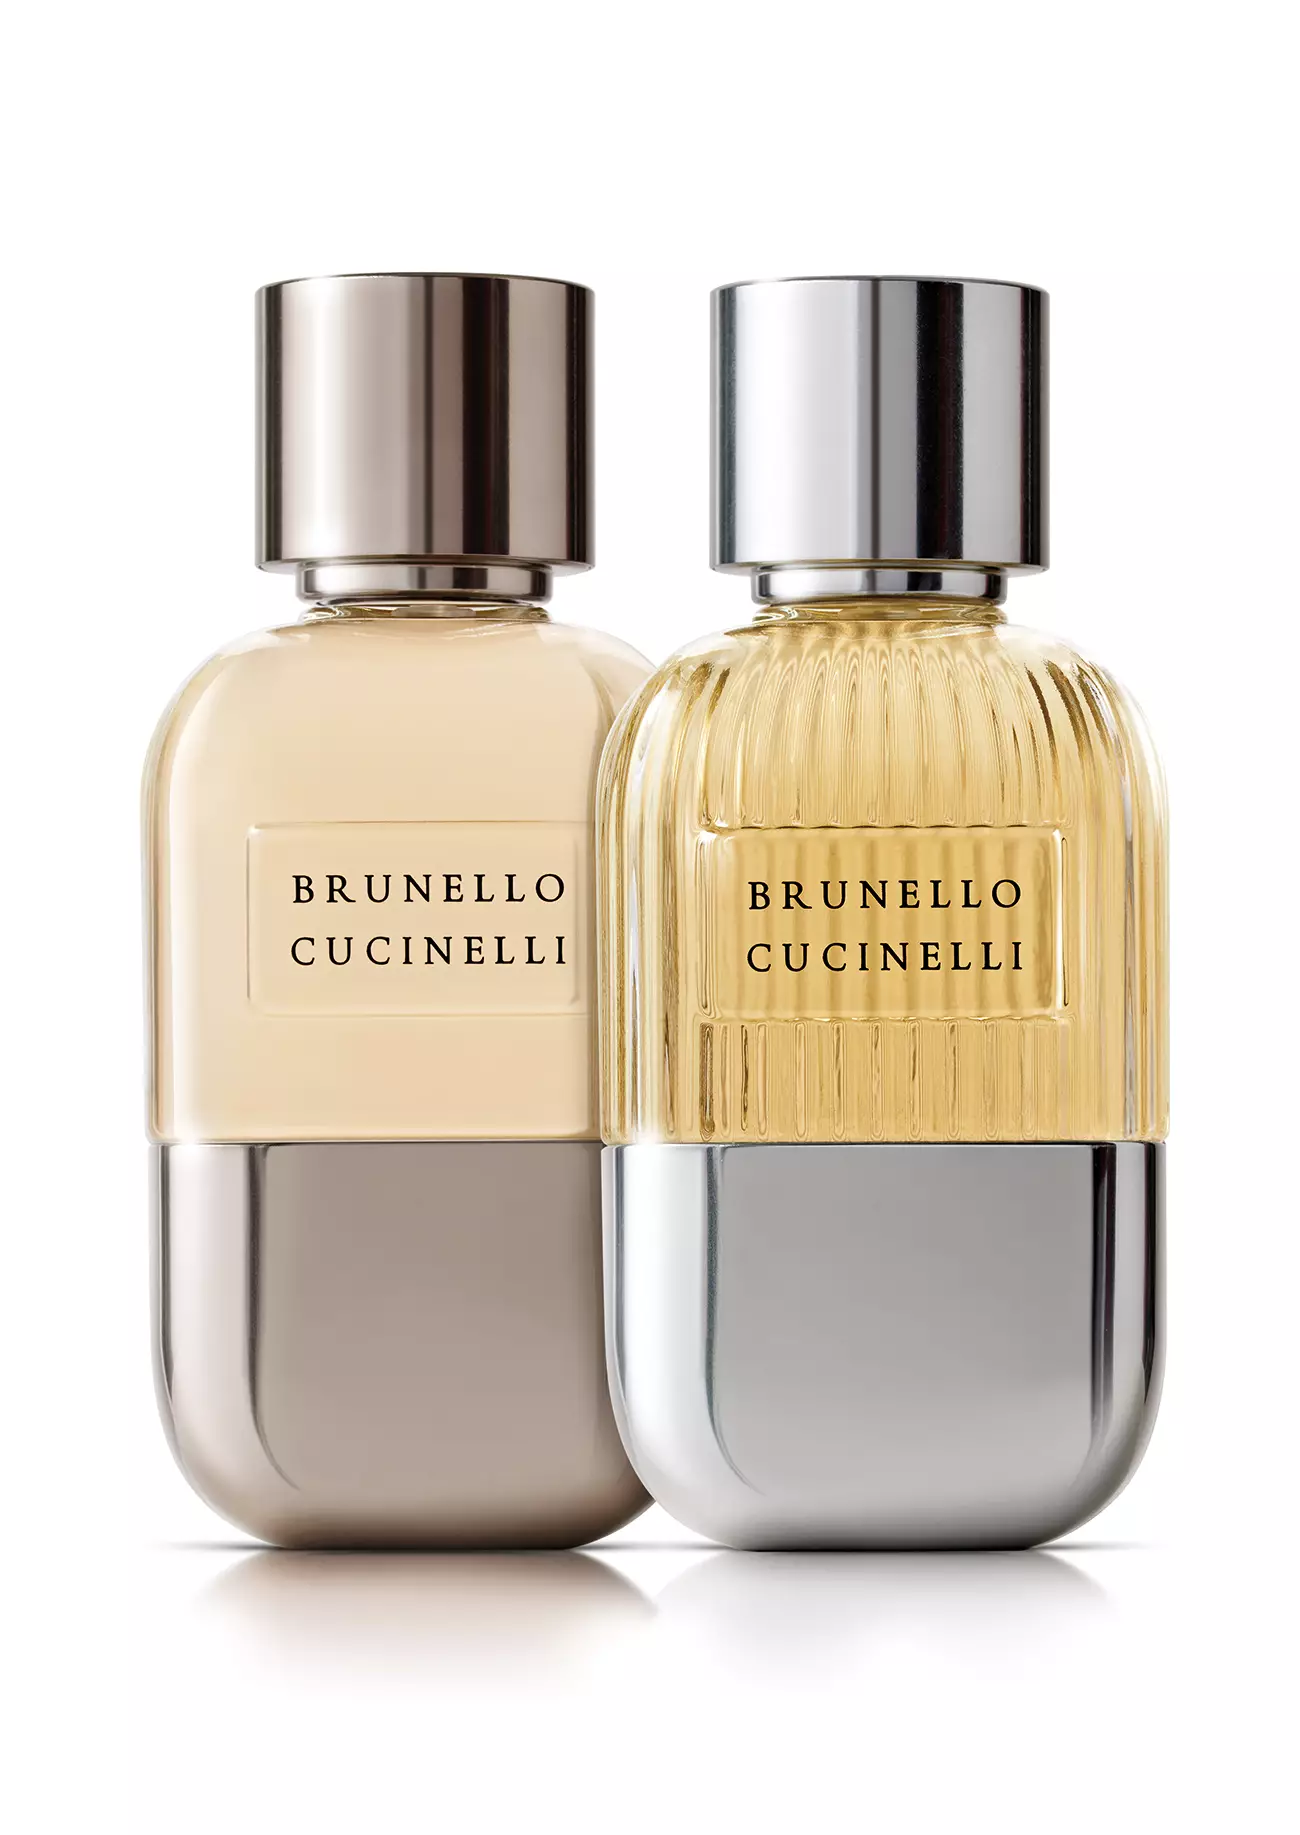 Brunello Cucinelli introduces first fragrances for men and women